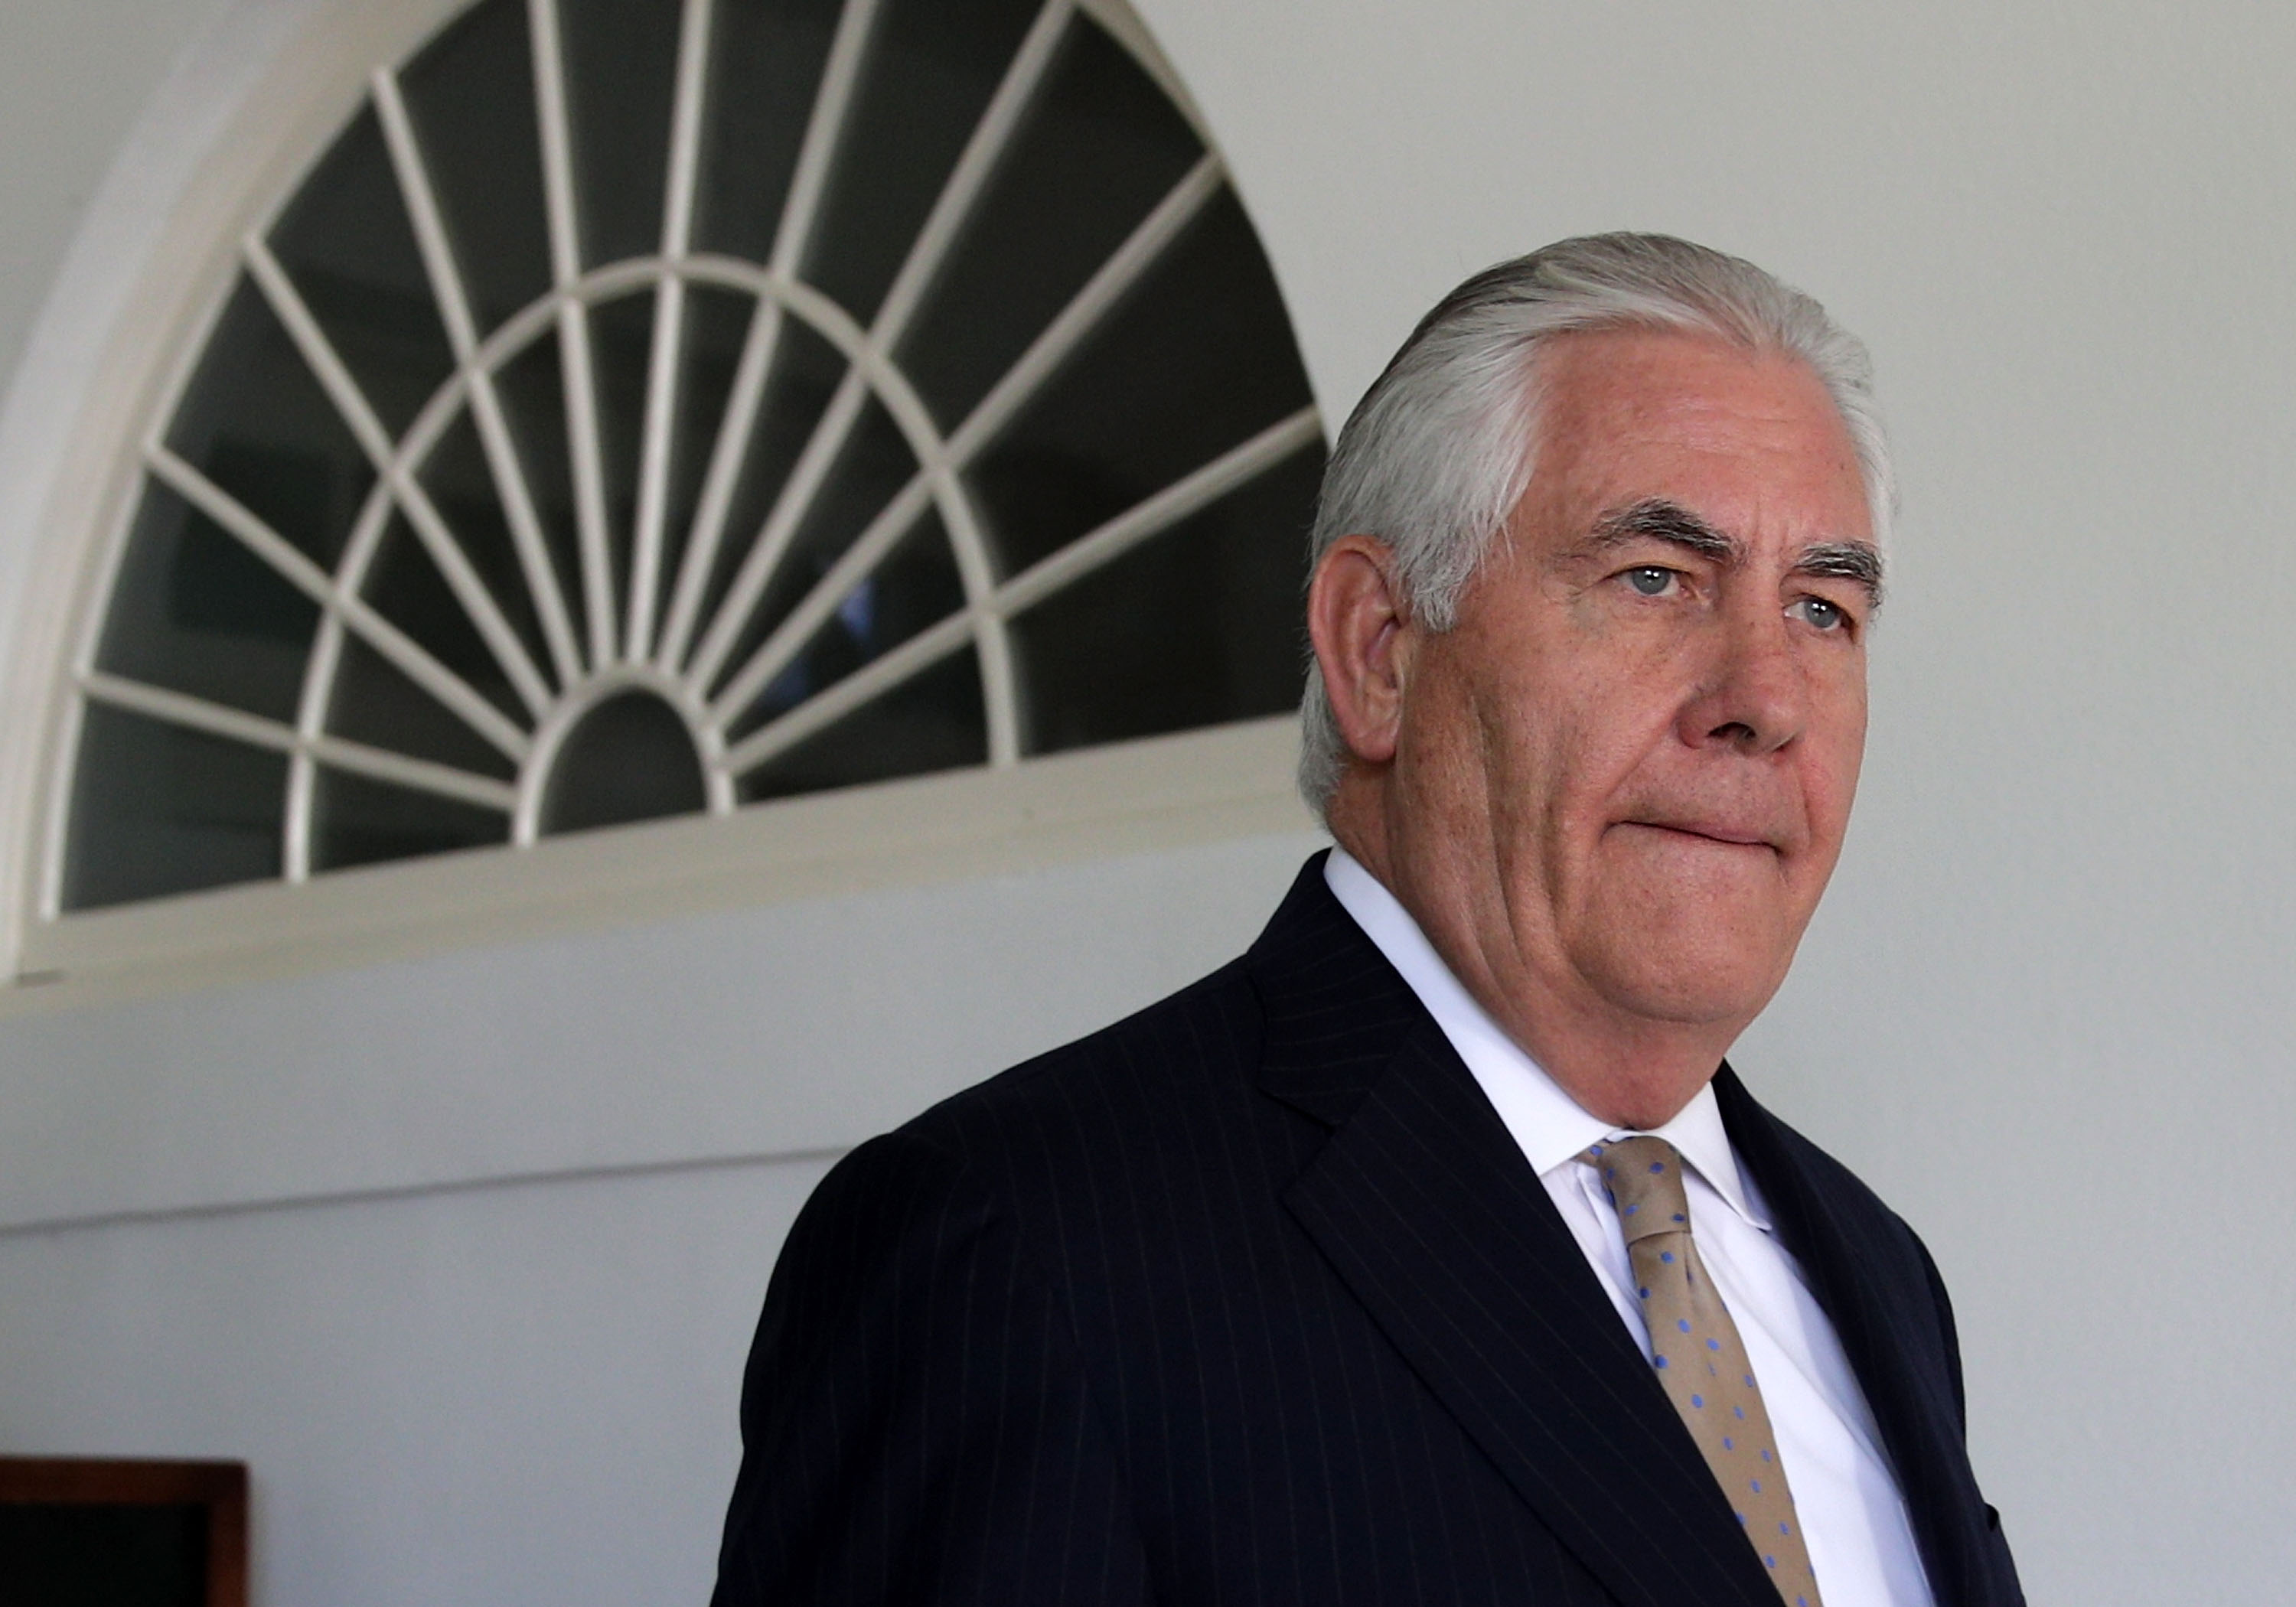 U.S. Secretary of State Rex Tillerson at the White House, June 9, 2017. (Alex Wong—Getty Images)